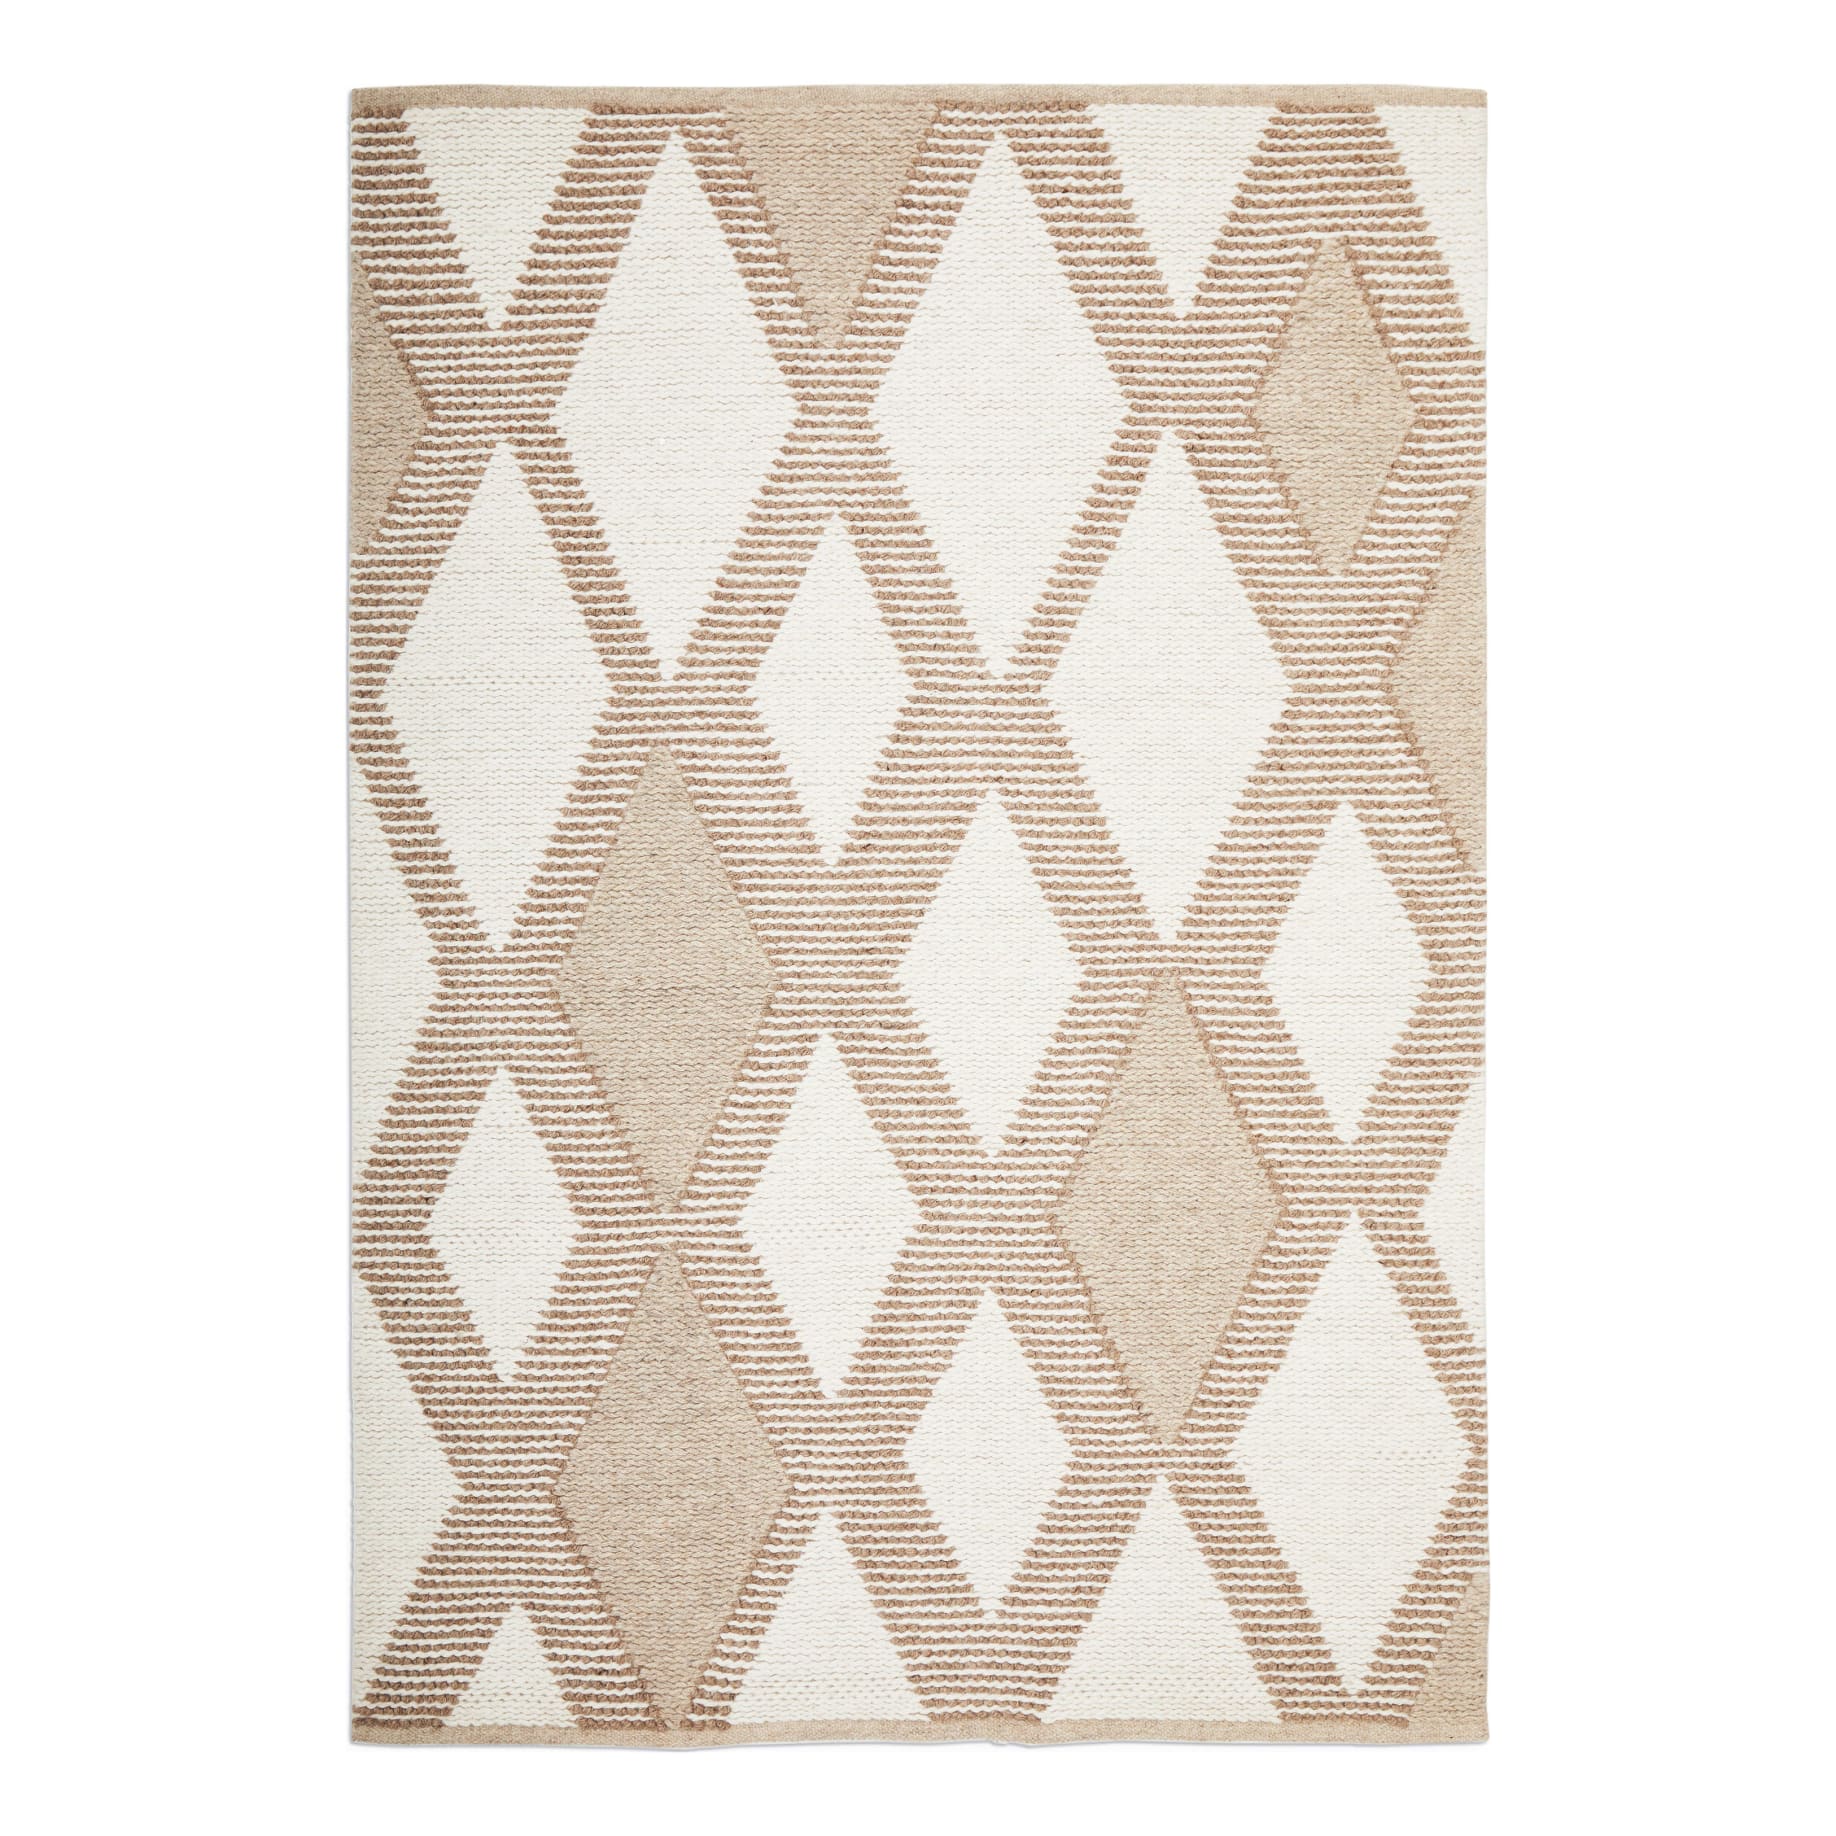 Avalon Shelly Rug 280x380cm in Natural